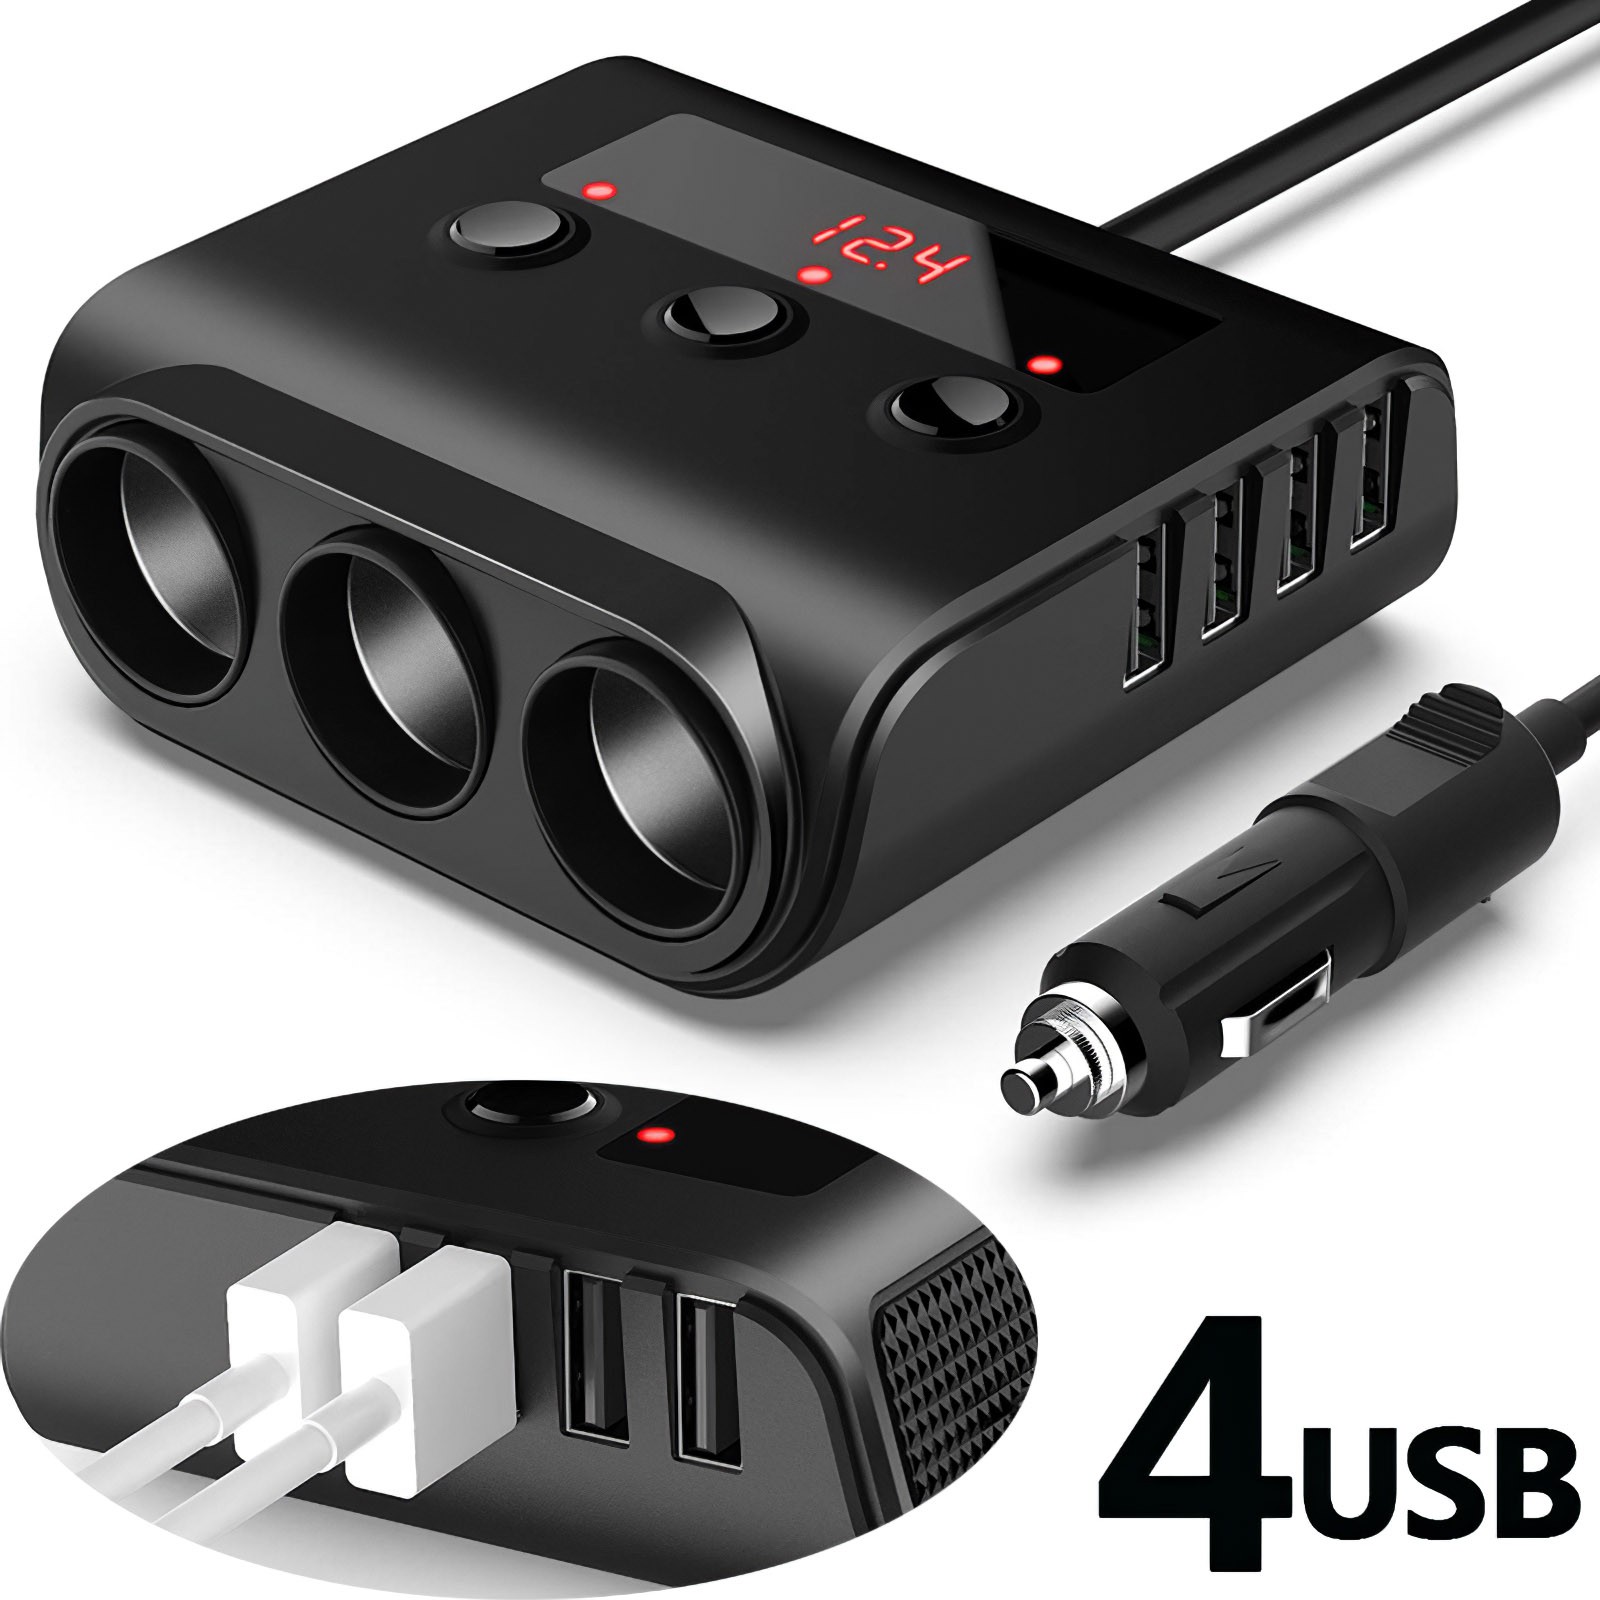 IN STOCK 12-24V Car Cigarette Lighter Socket Splitter Car Charger With ON/OFF Switch 4 Ports USB Charger For GPS Mobile Phone